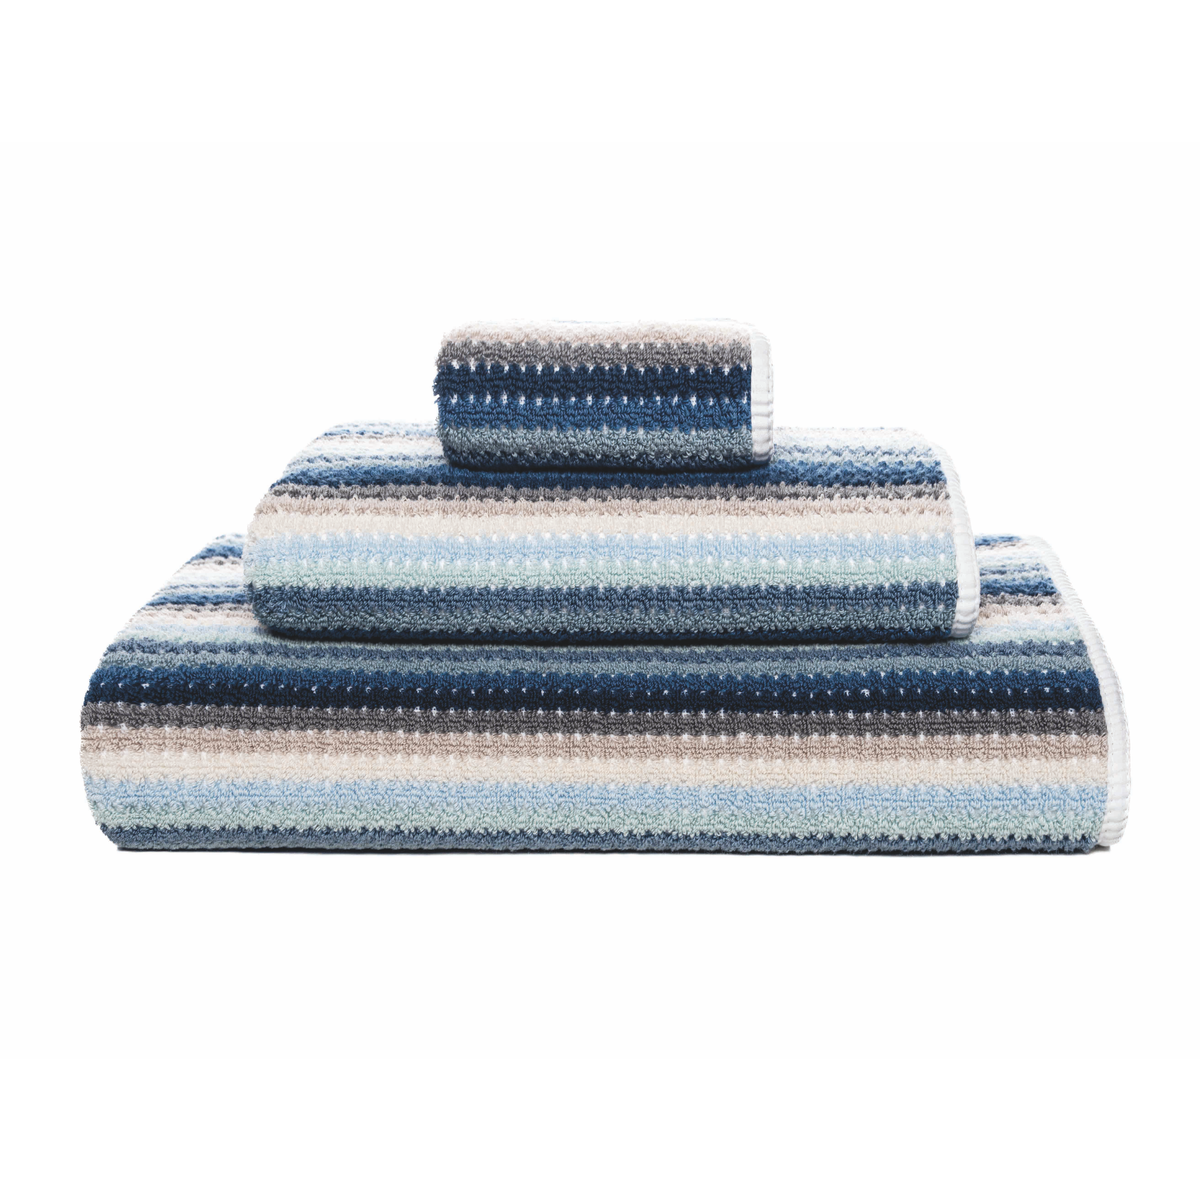 Stack of Graccioza Lollypop Bath Towels Against White Background